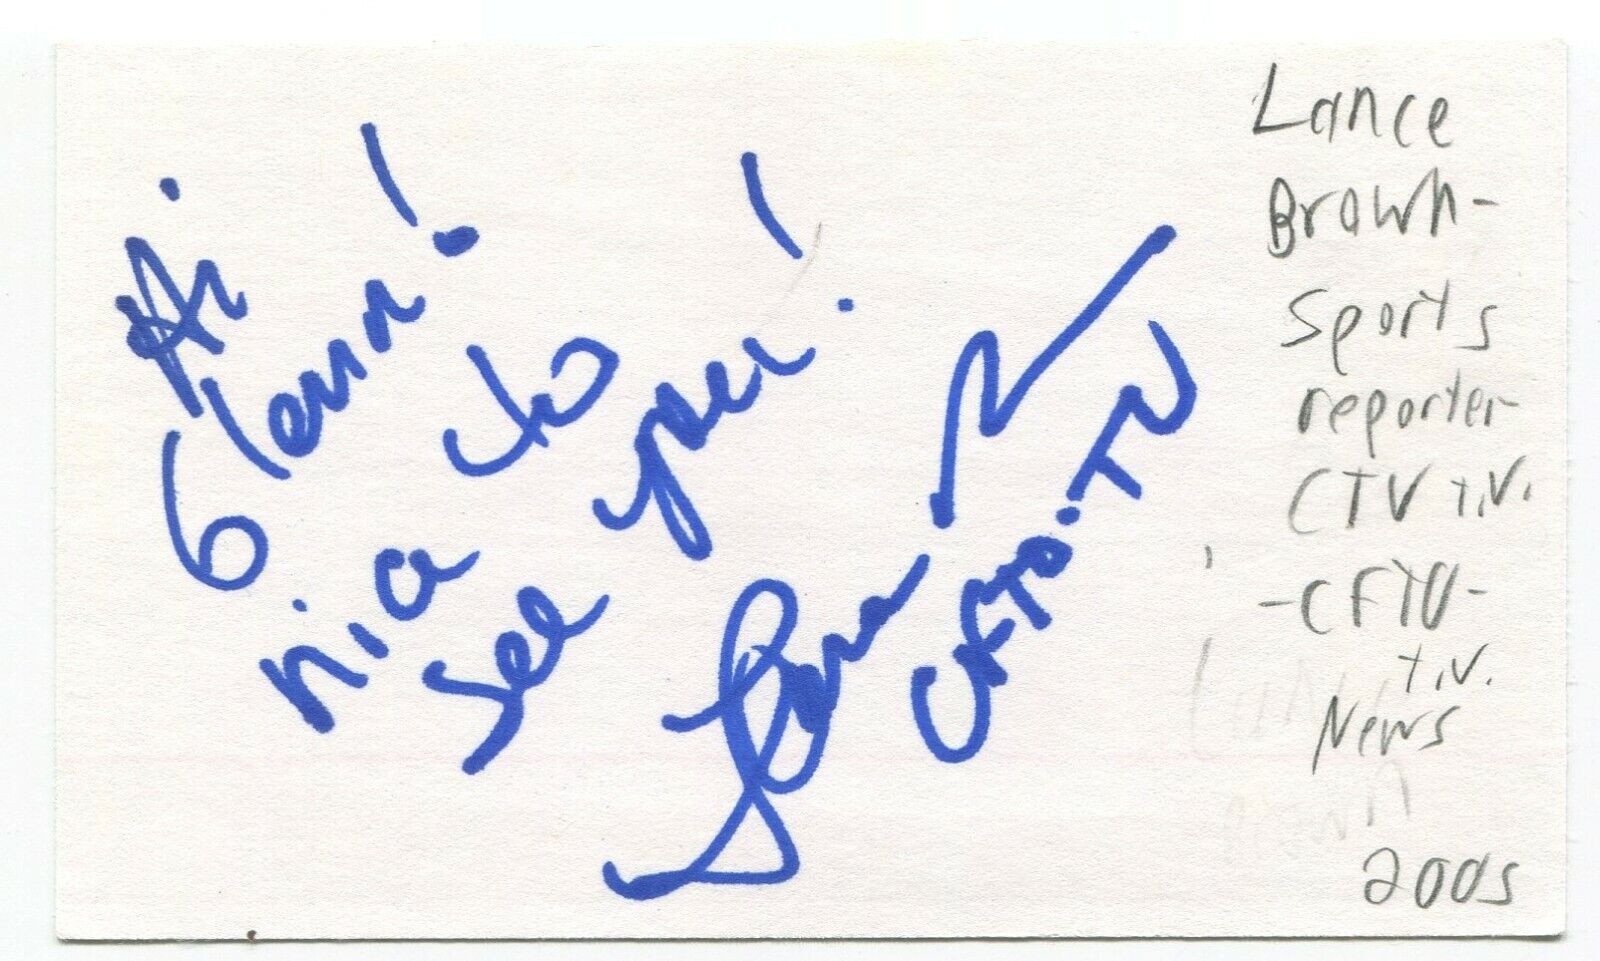 Lance Brown Signed 3x5 Index Card Autographed Signature Sports Reporter